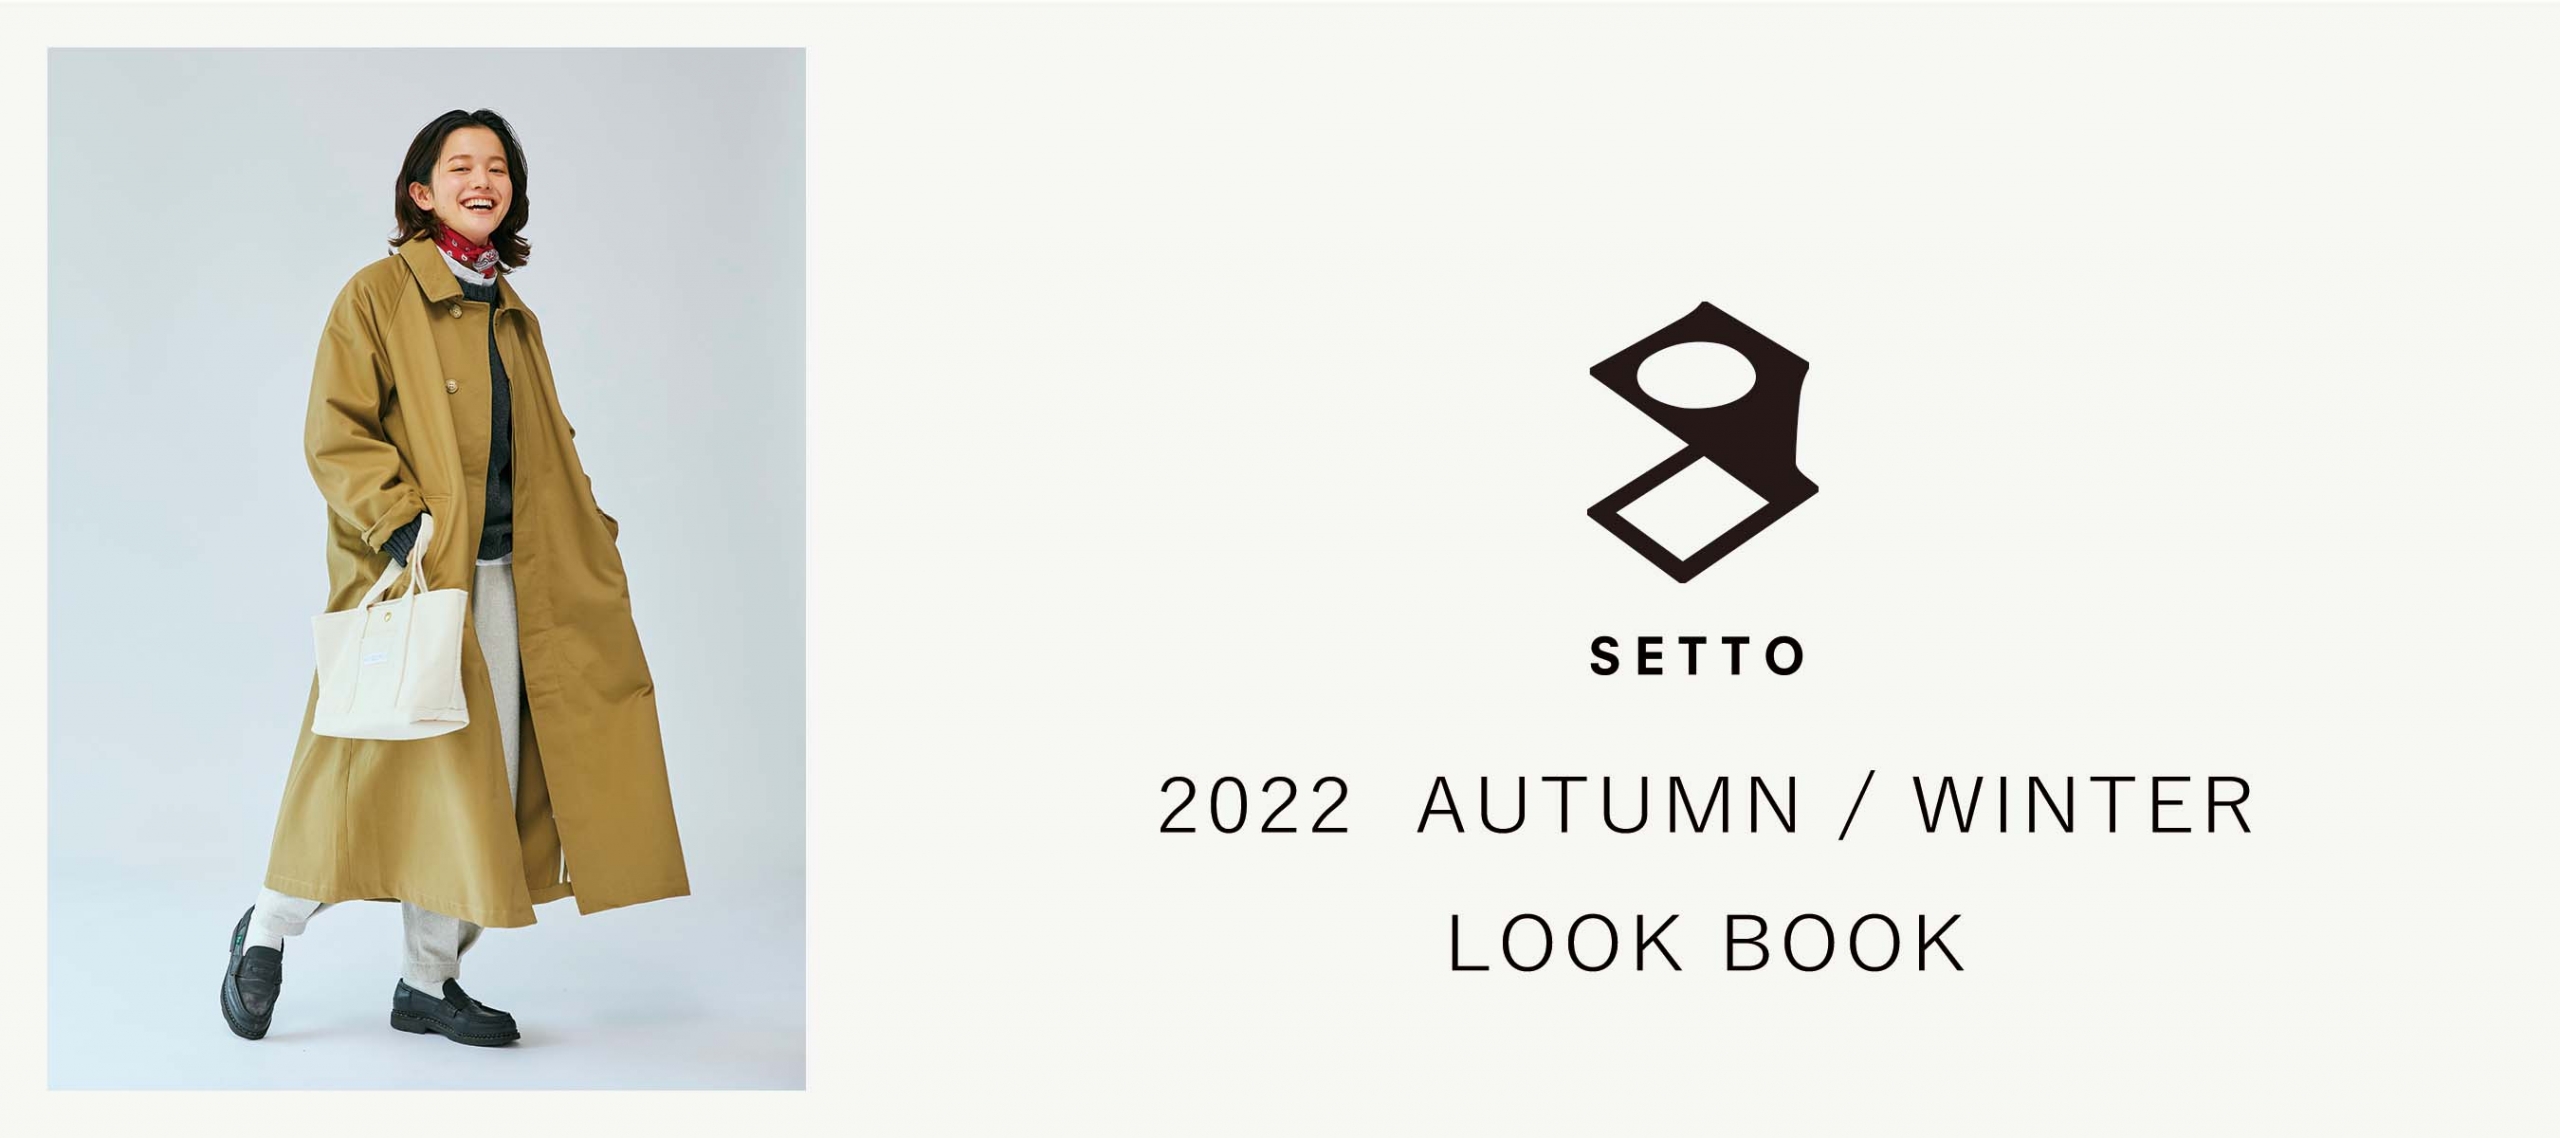 PC baner _SETTO 22AW lookbook